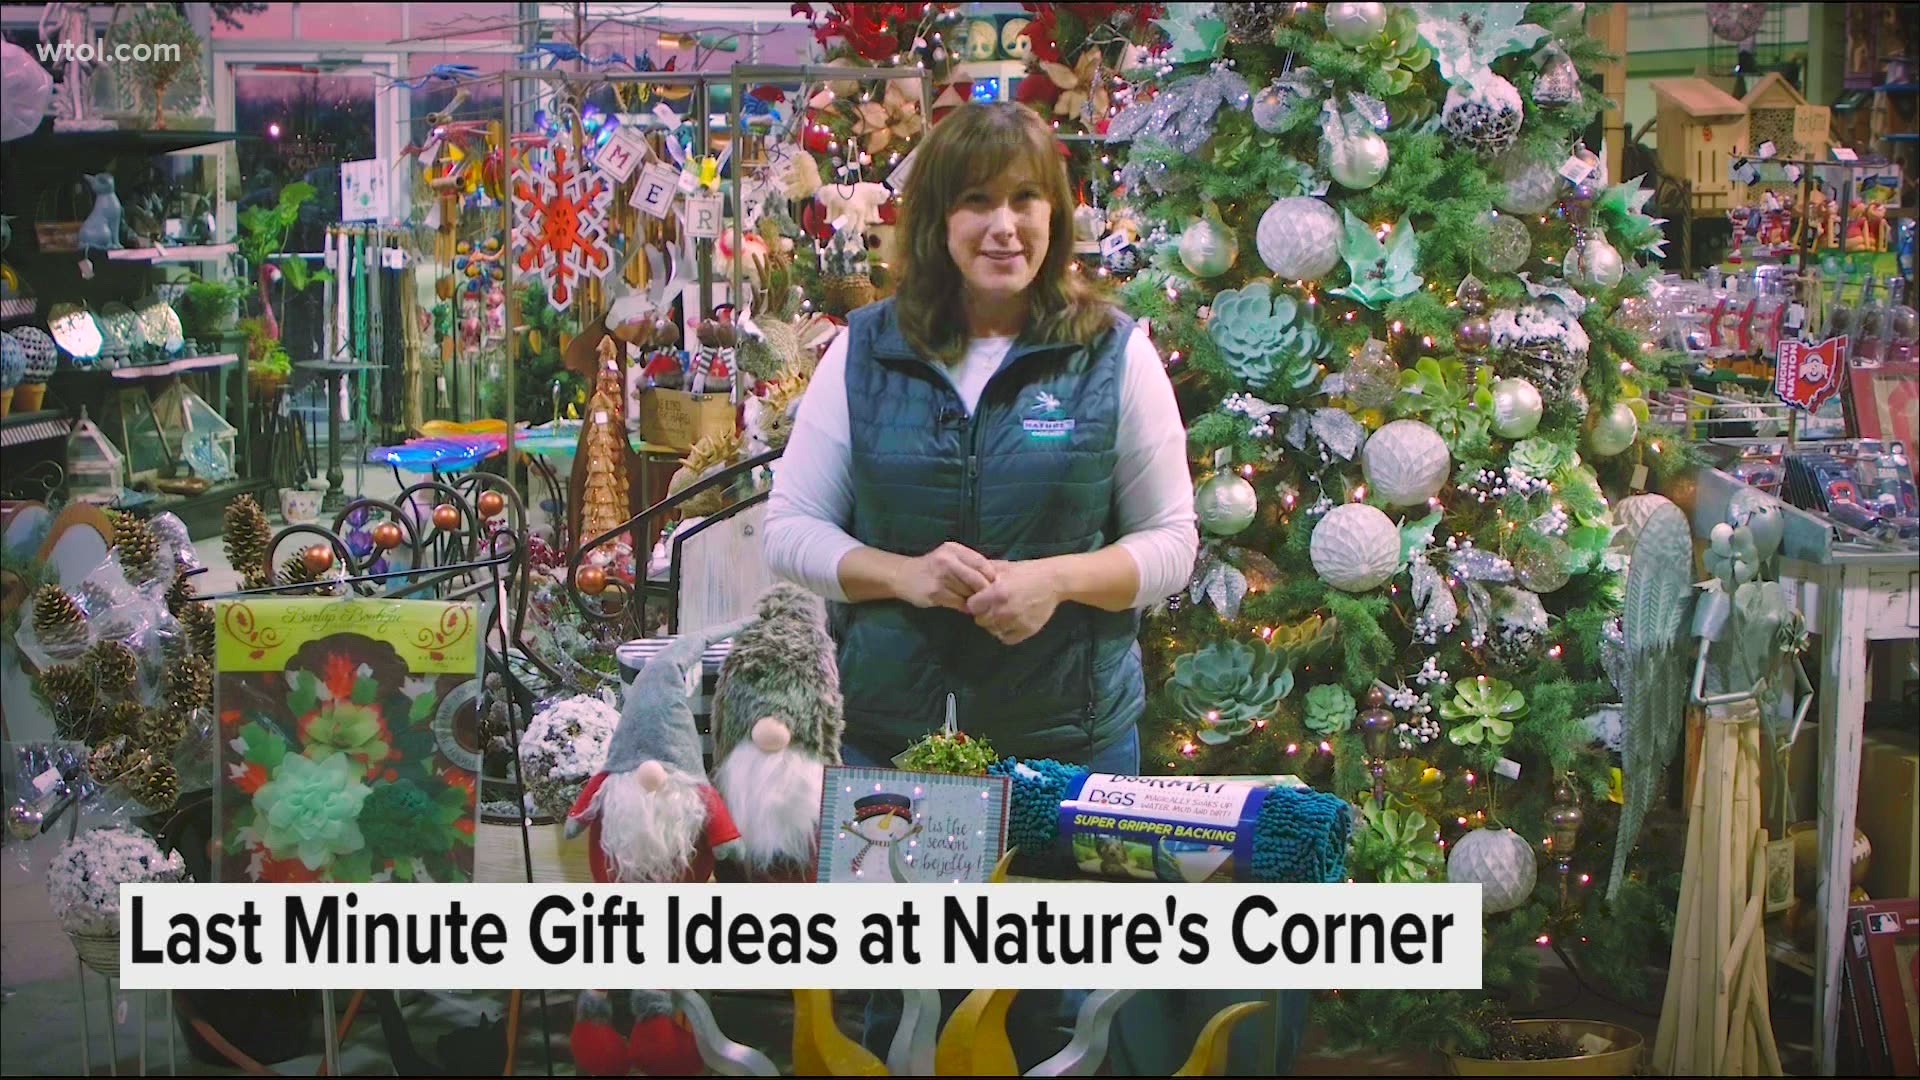 If you haven't finished all your last-minute Christmas shopping, don't worry. Jenny Amstutz gives you a look at some that might catch your eye at Nature's Corner.